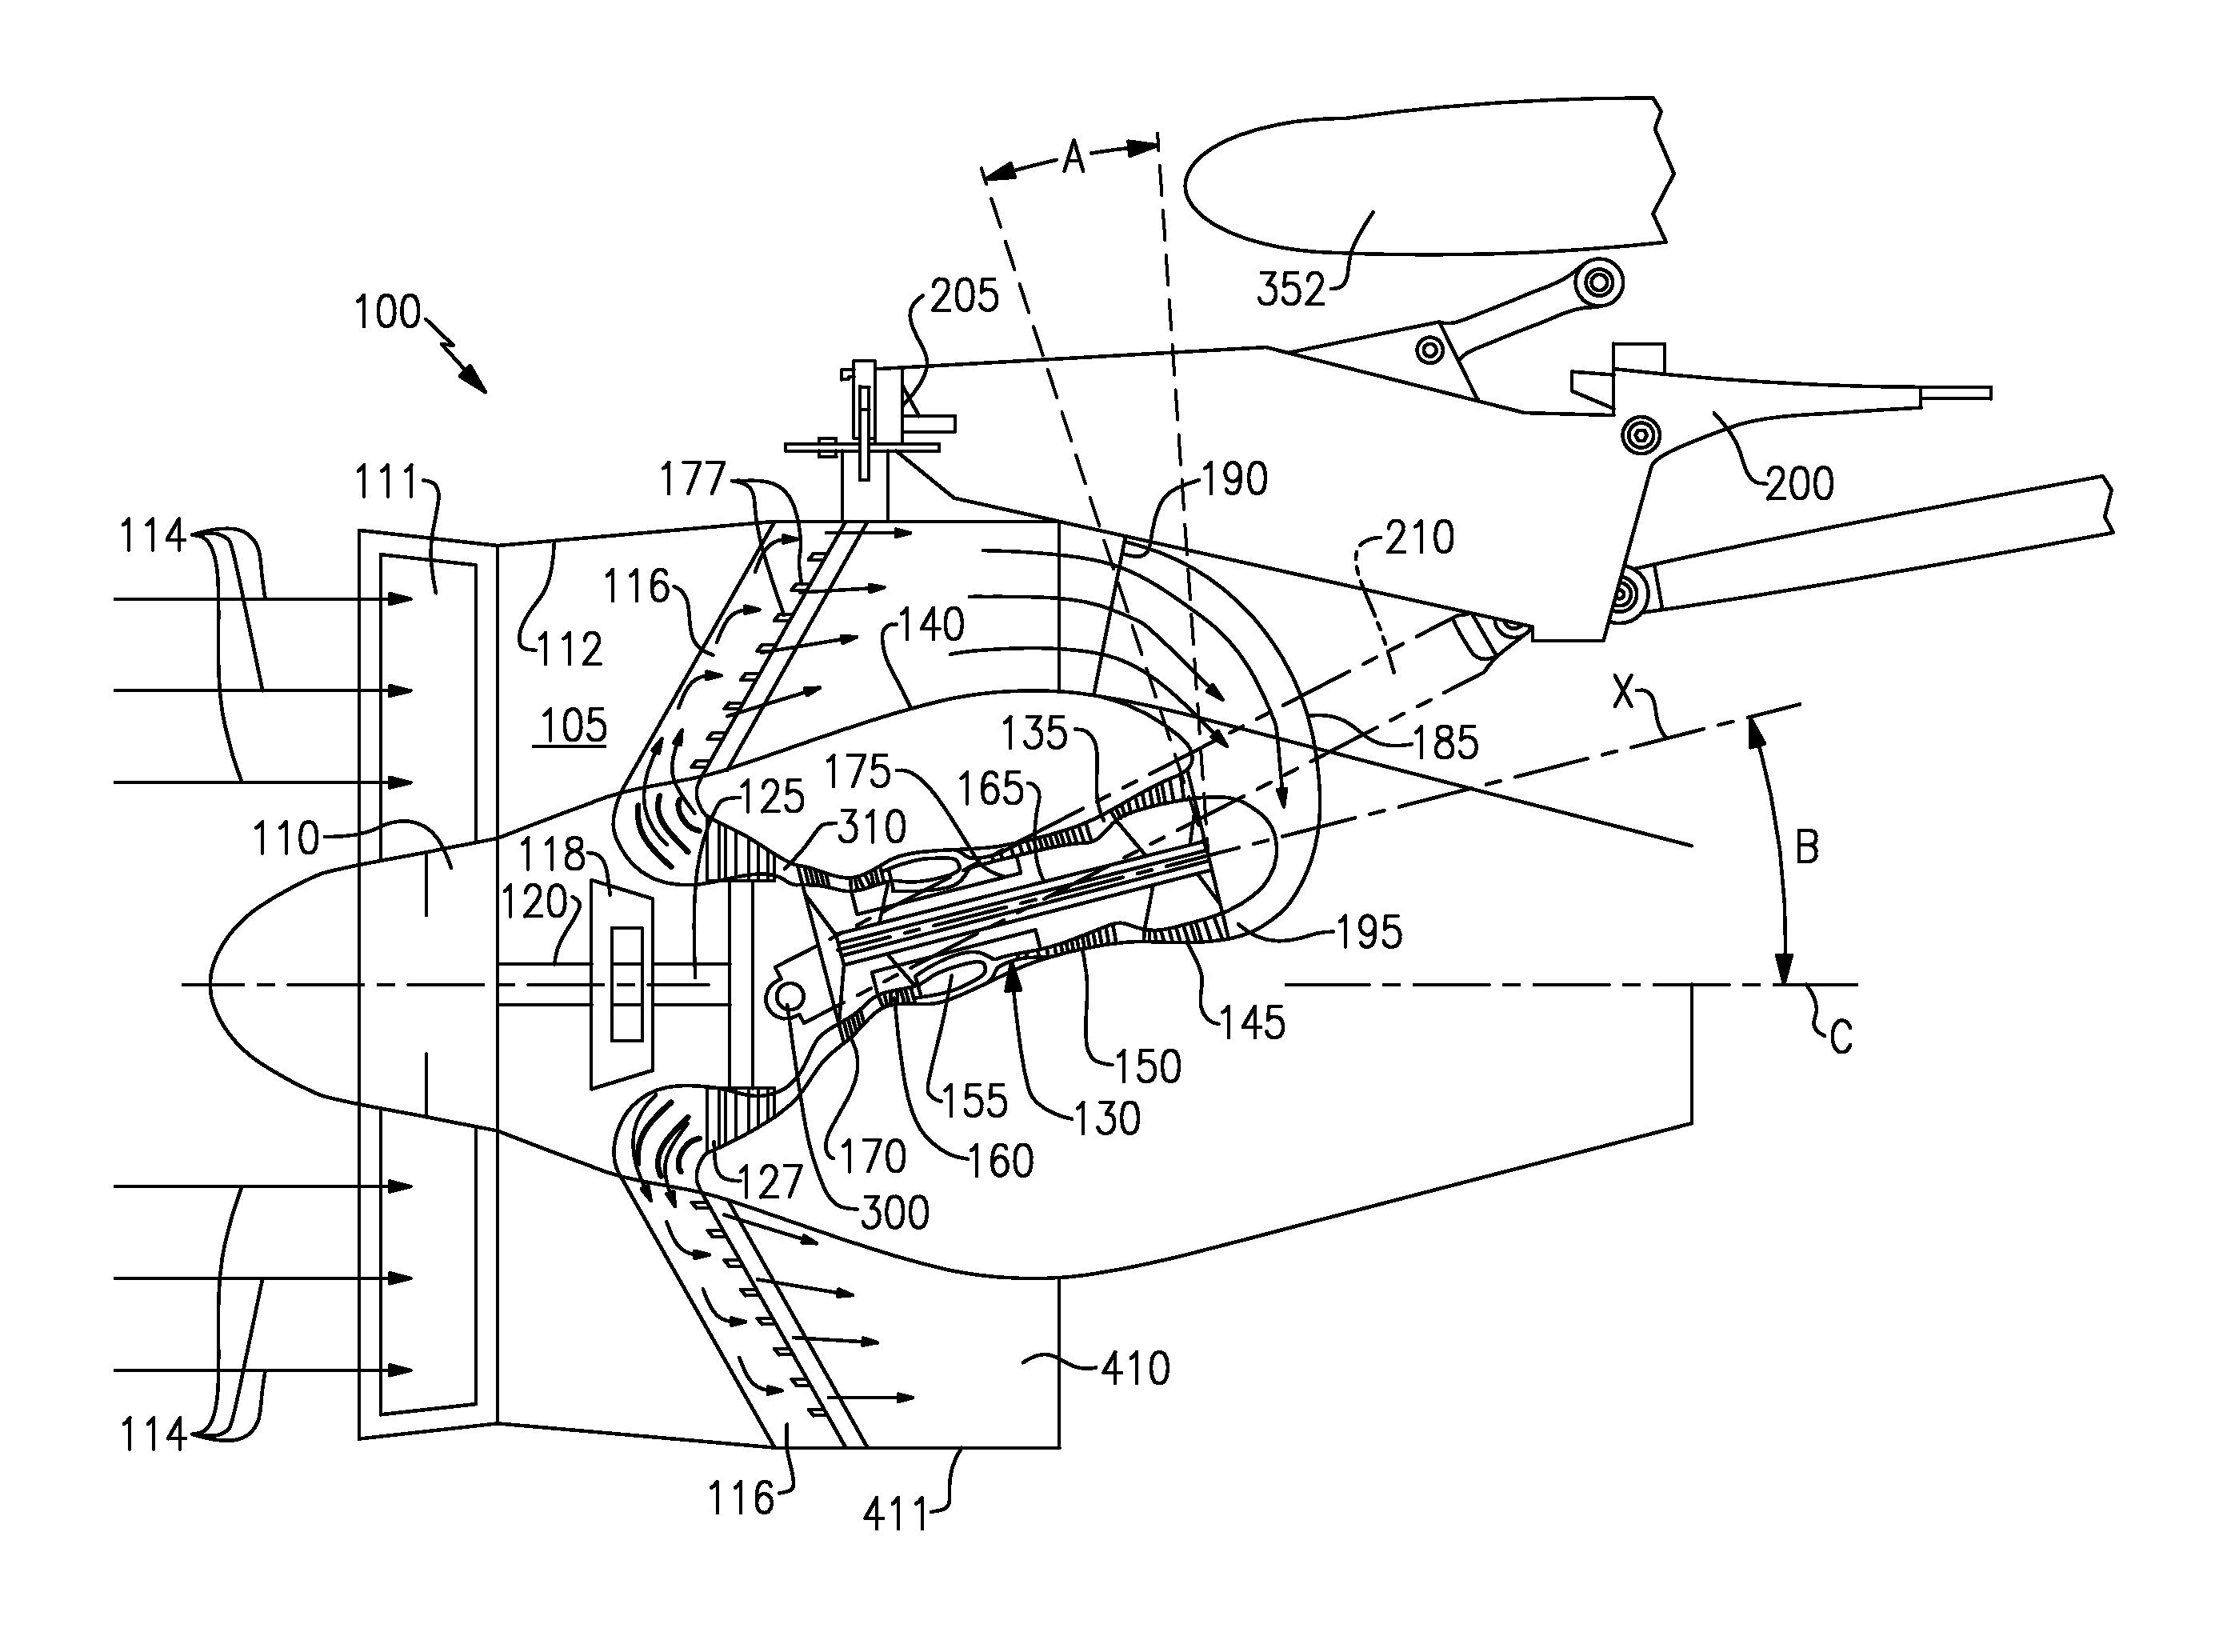 Gas turbine engine with separate core and propulsion unit